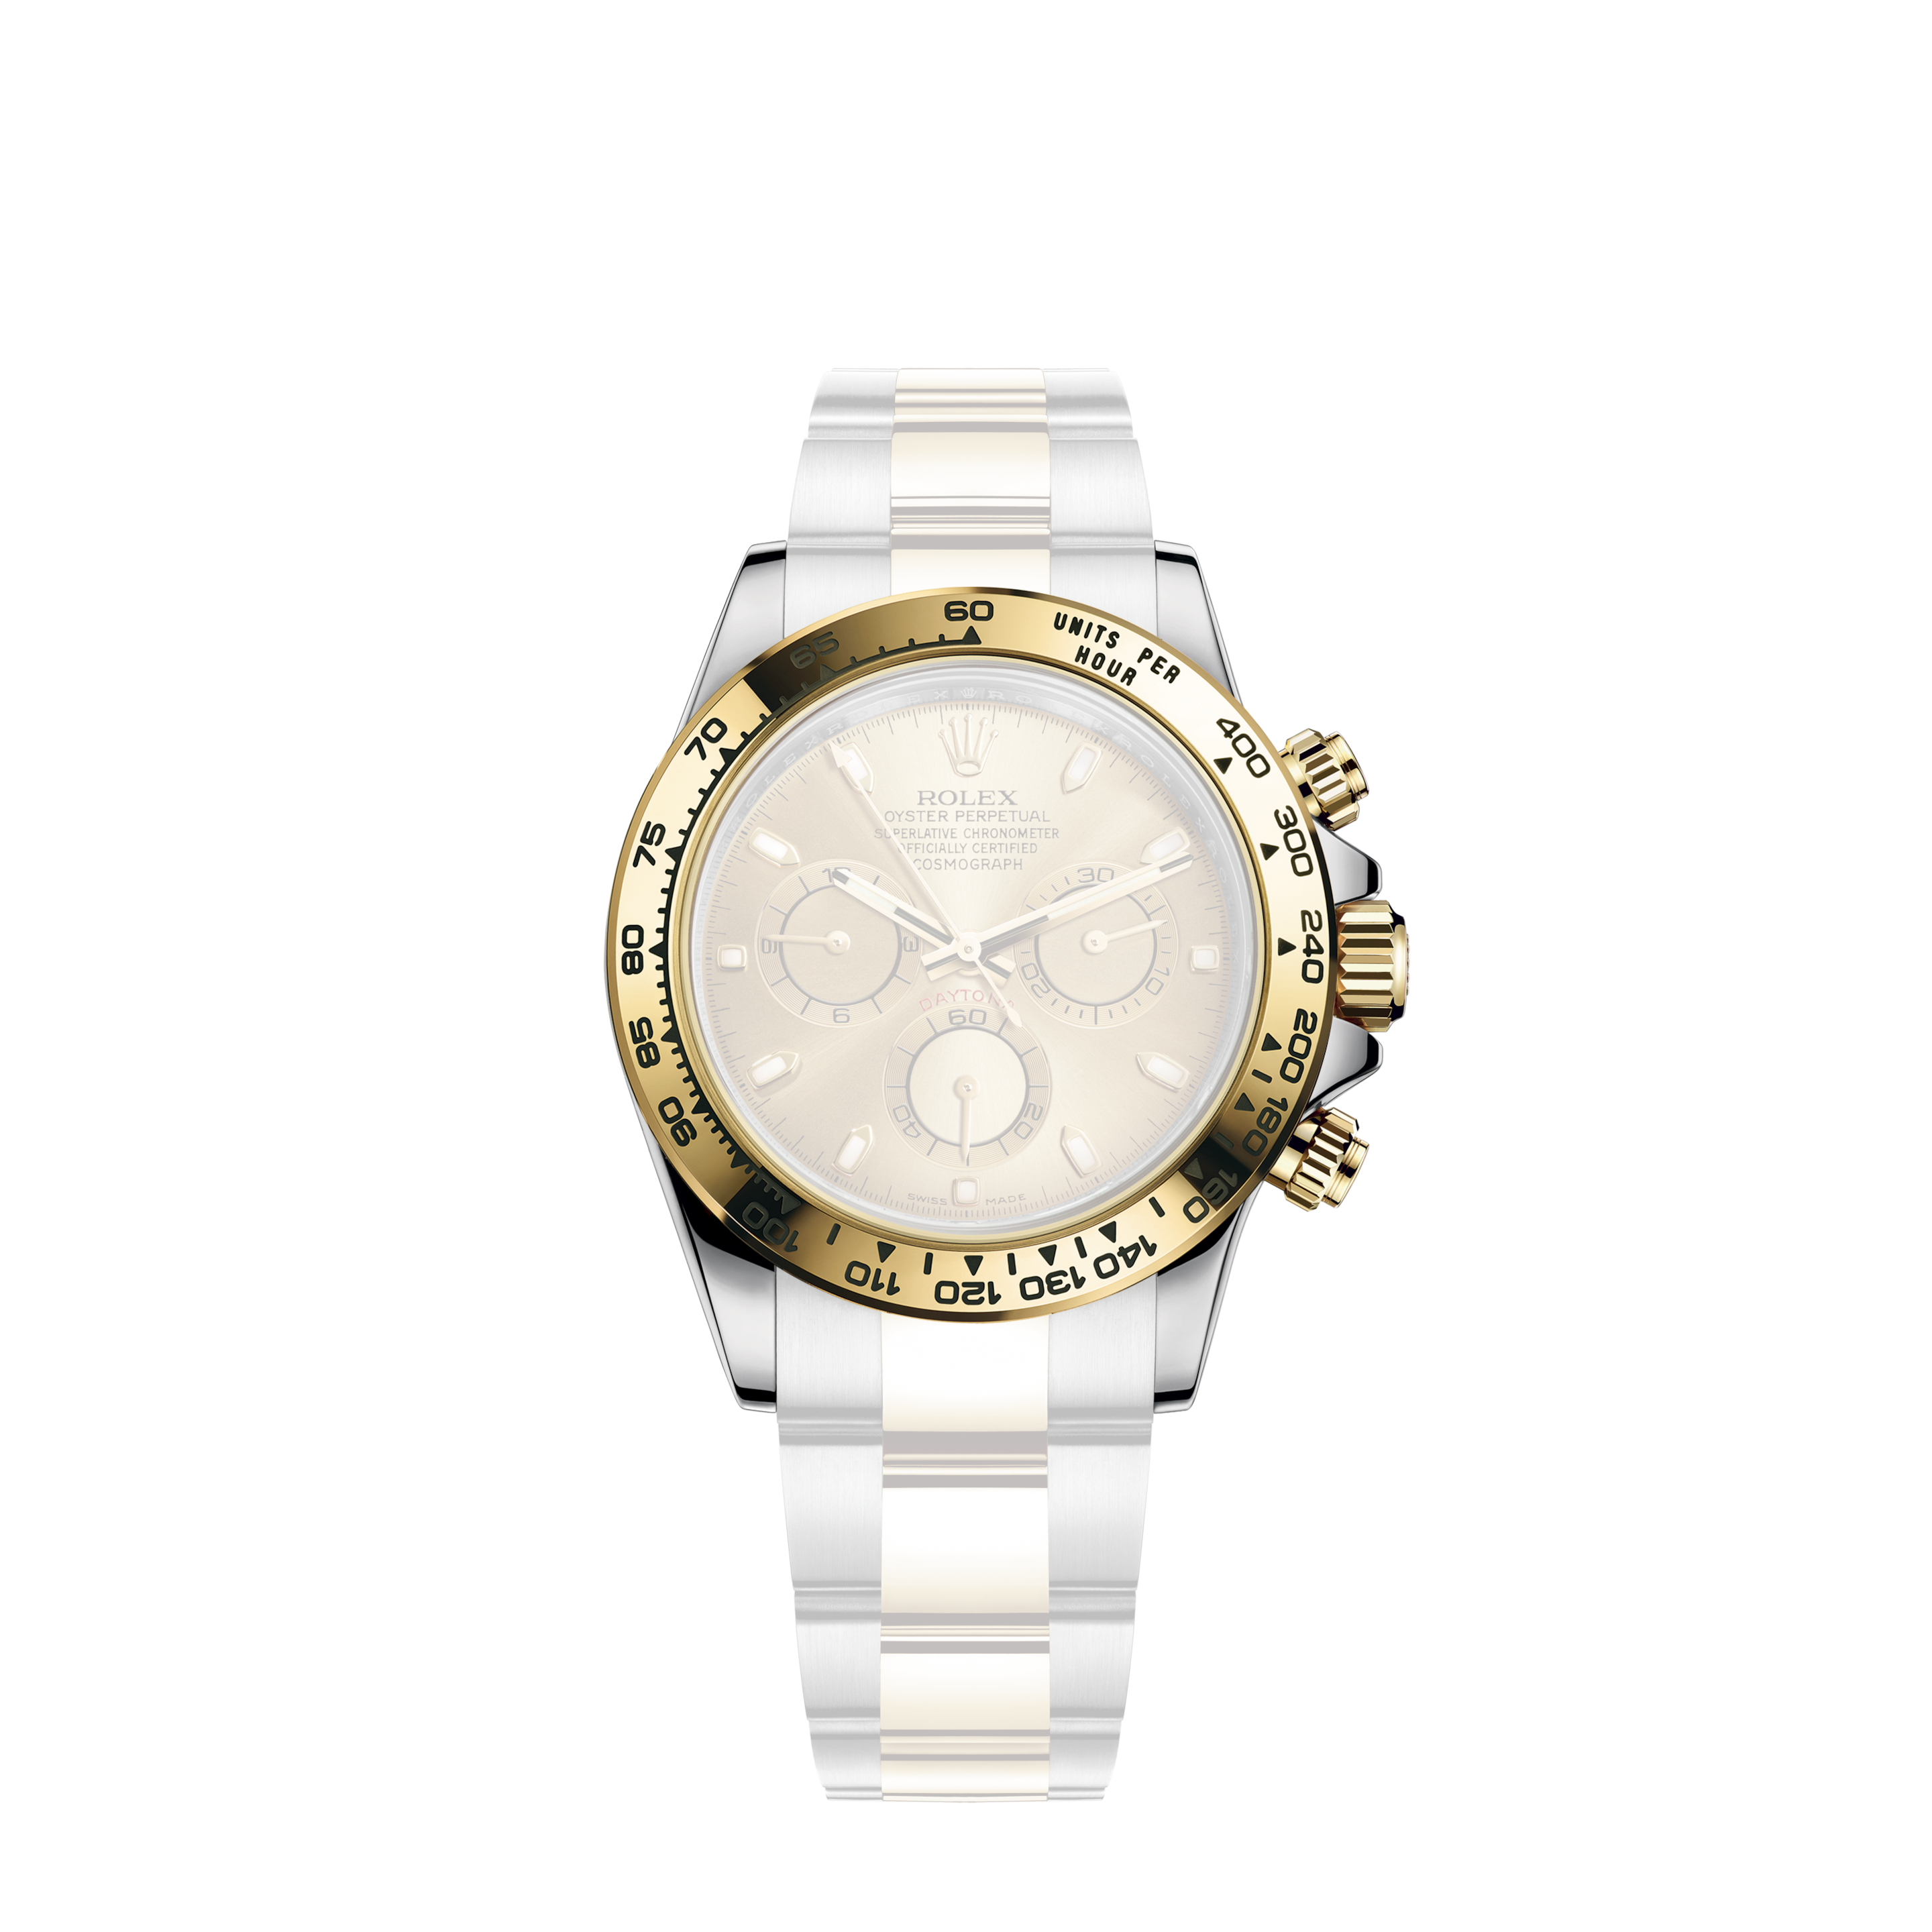 Rolex Ivory Pearl 36mm Datejust Stainless Steel Fully Iced Diamond PaveRolex Ivory Pearl Baguette 26mm Datejust Two Tone Side Diamonds + Rubies